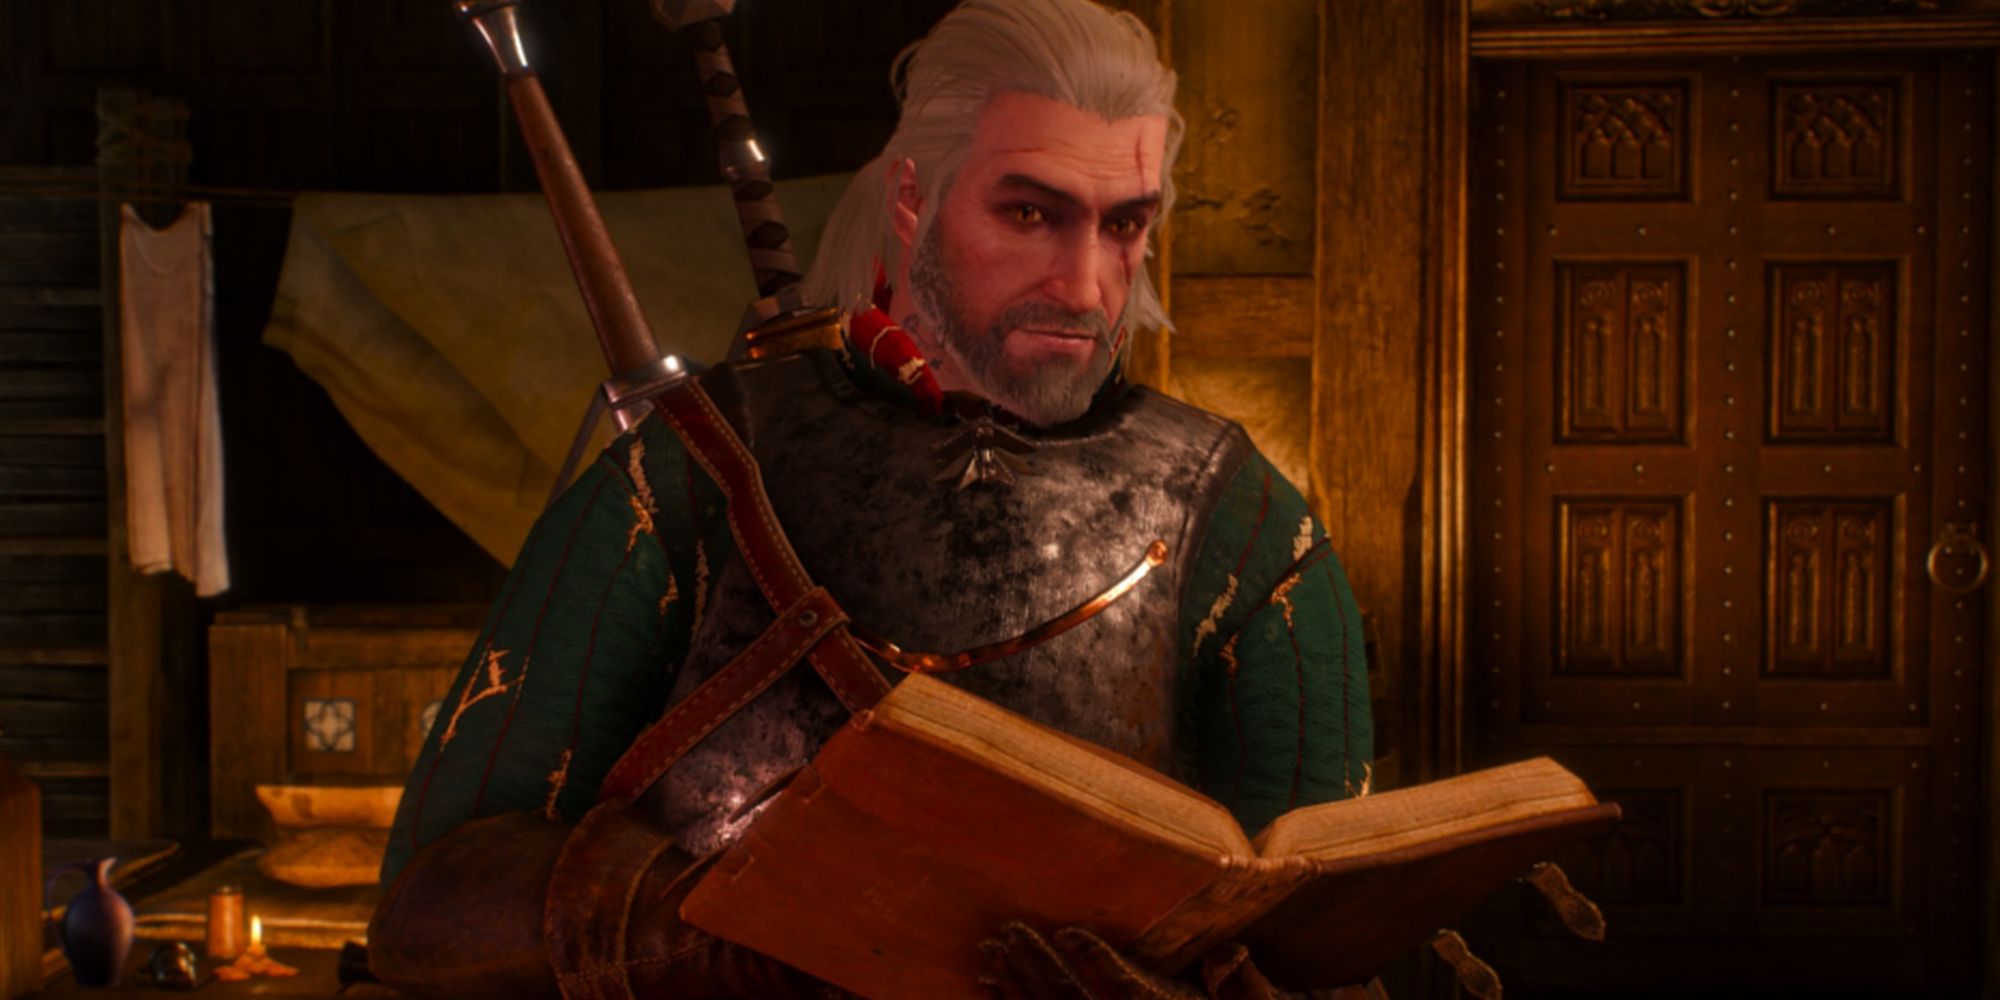 Geralt looking up from a book and smiling